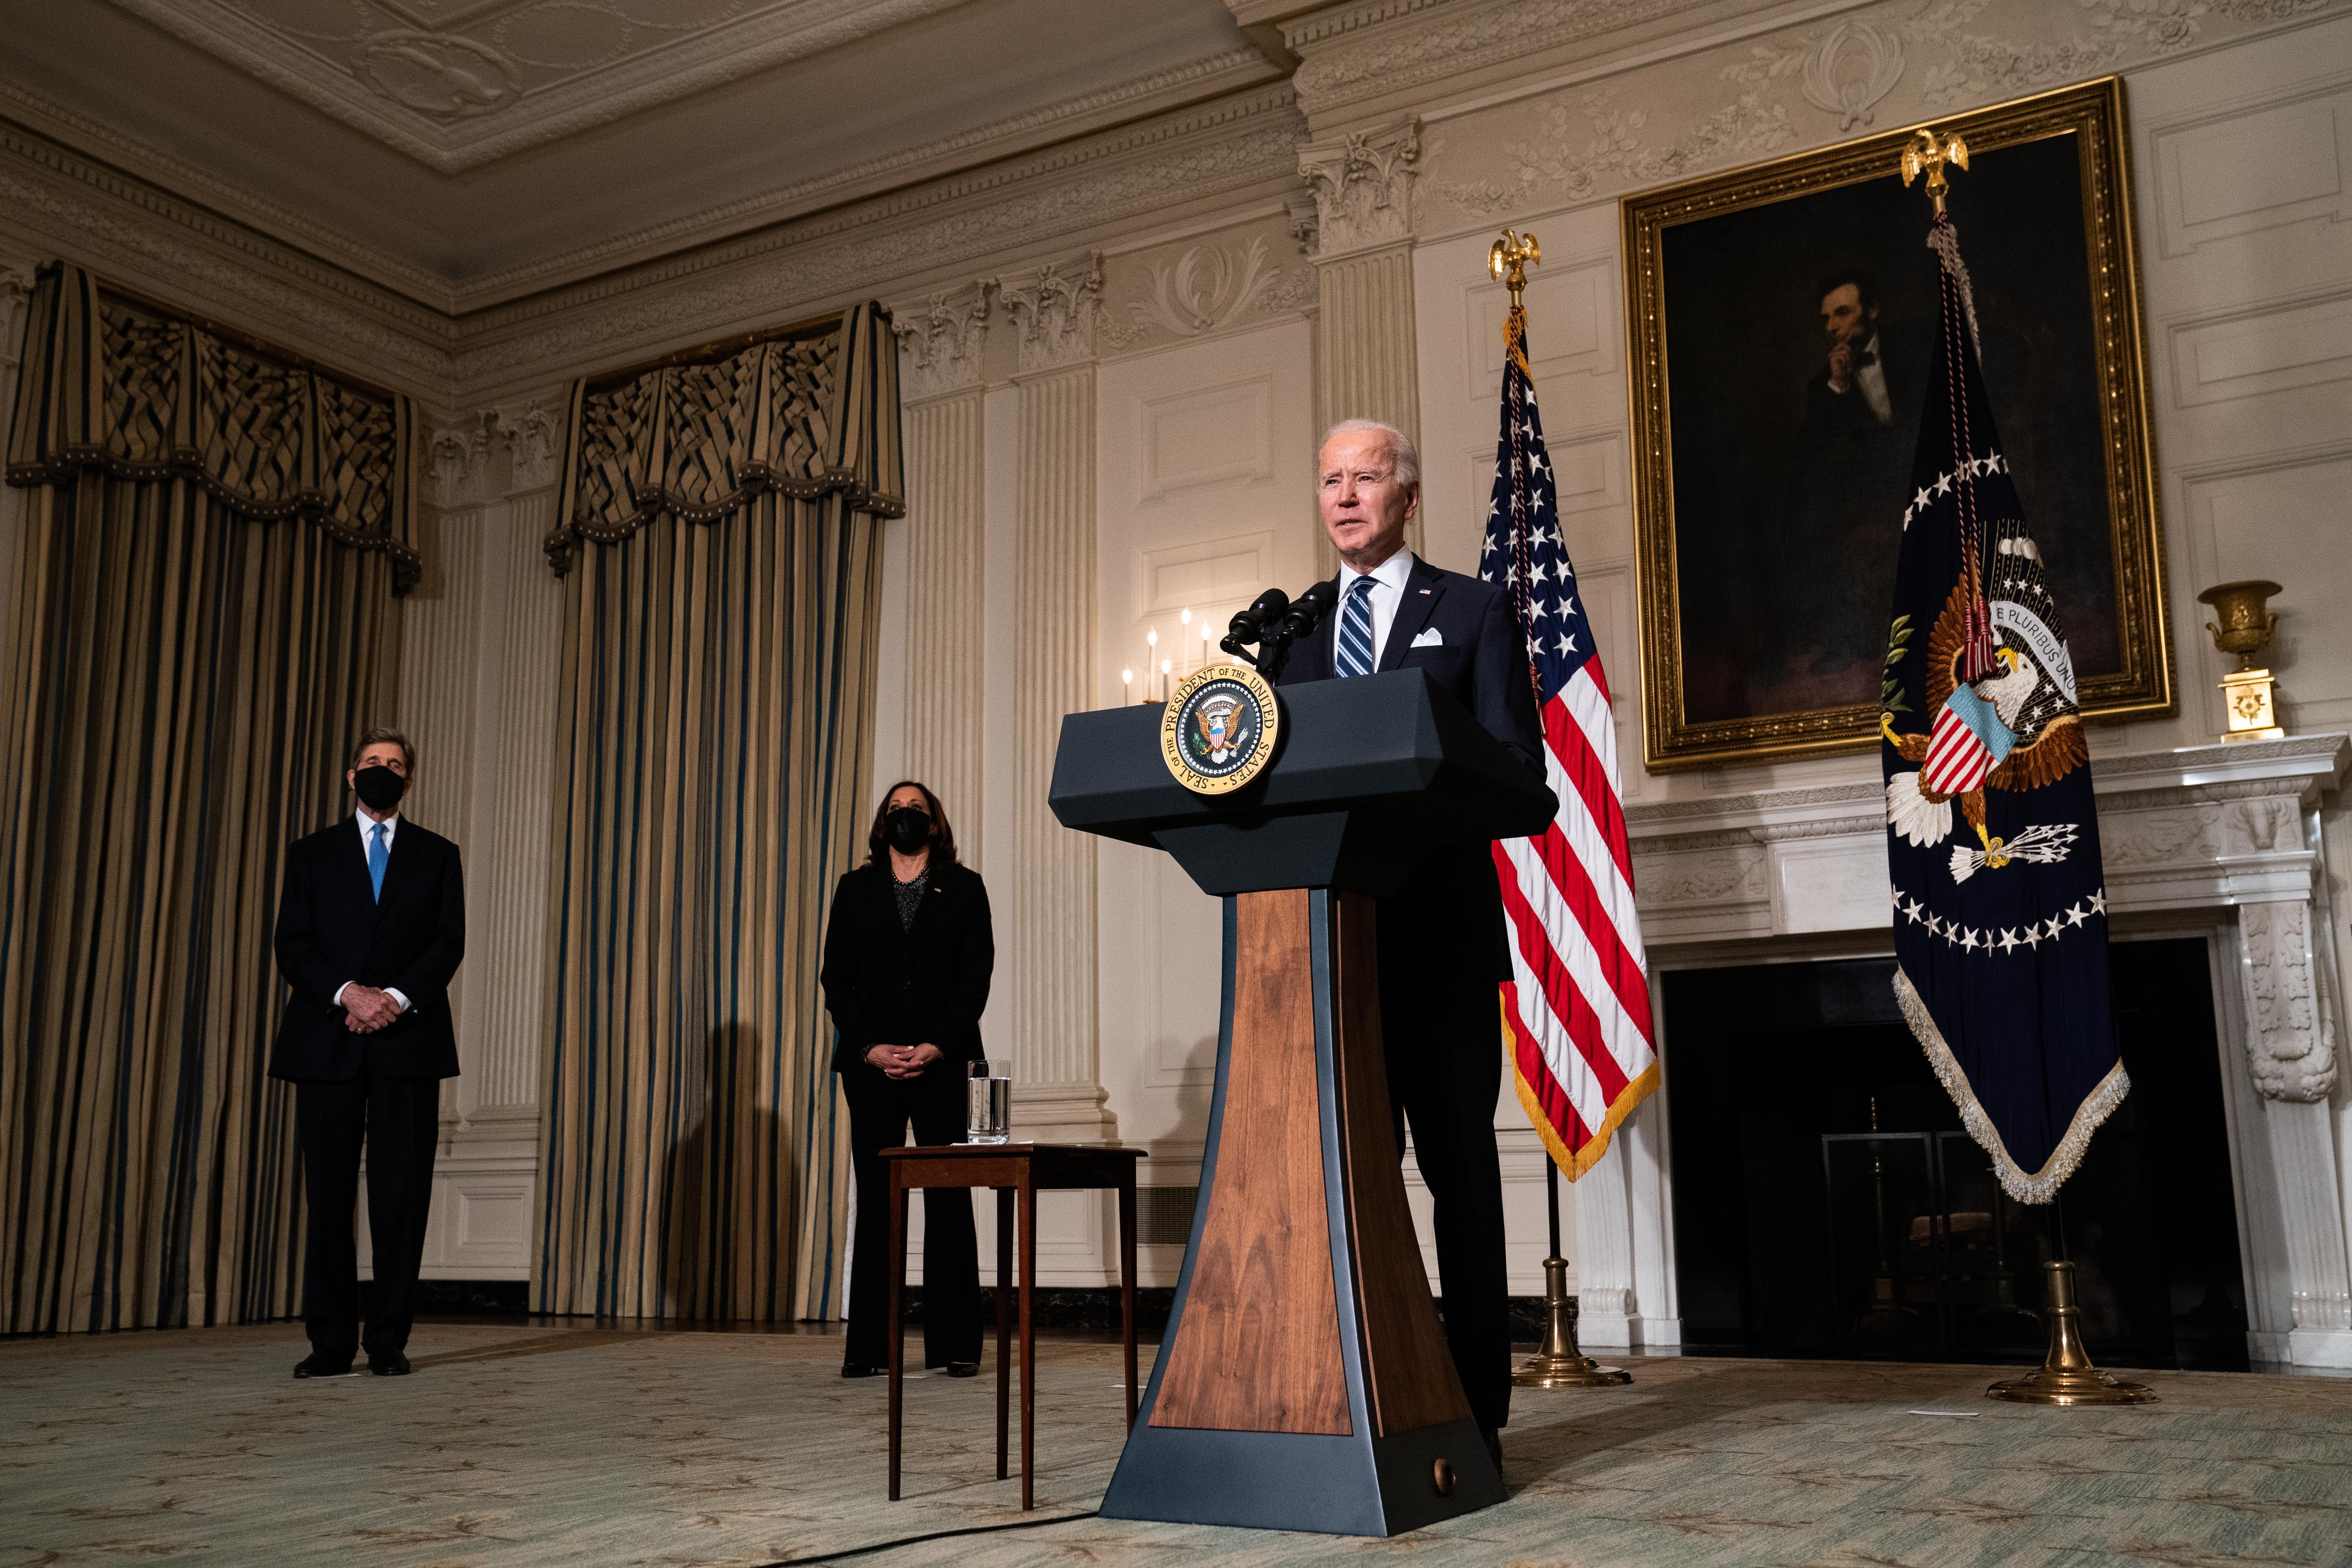 JANUARY 27: US President Joe Biden speaks about climate change issues in the State Dining Room of the White House on January 27, 2021 in Washington, DC. President Biden signed several executive orders related to the climate change crisis on Wednesday, including one directing a pause on new oil and natural gas leases on public lands. Also pictured, left to right, Special Presidential Envoy for Climate John Kerry and US Vice President Kamala Harris.&nbsp;